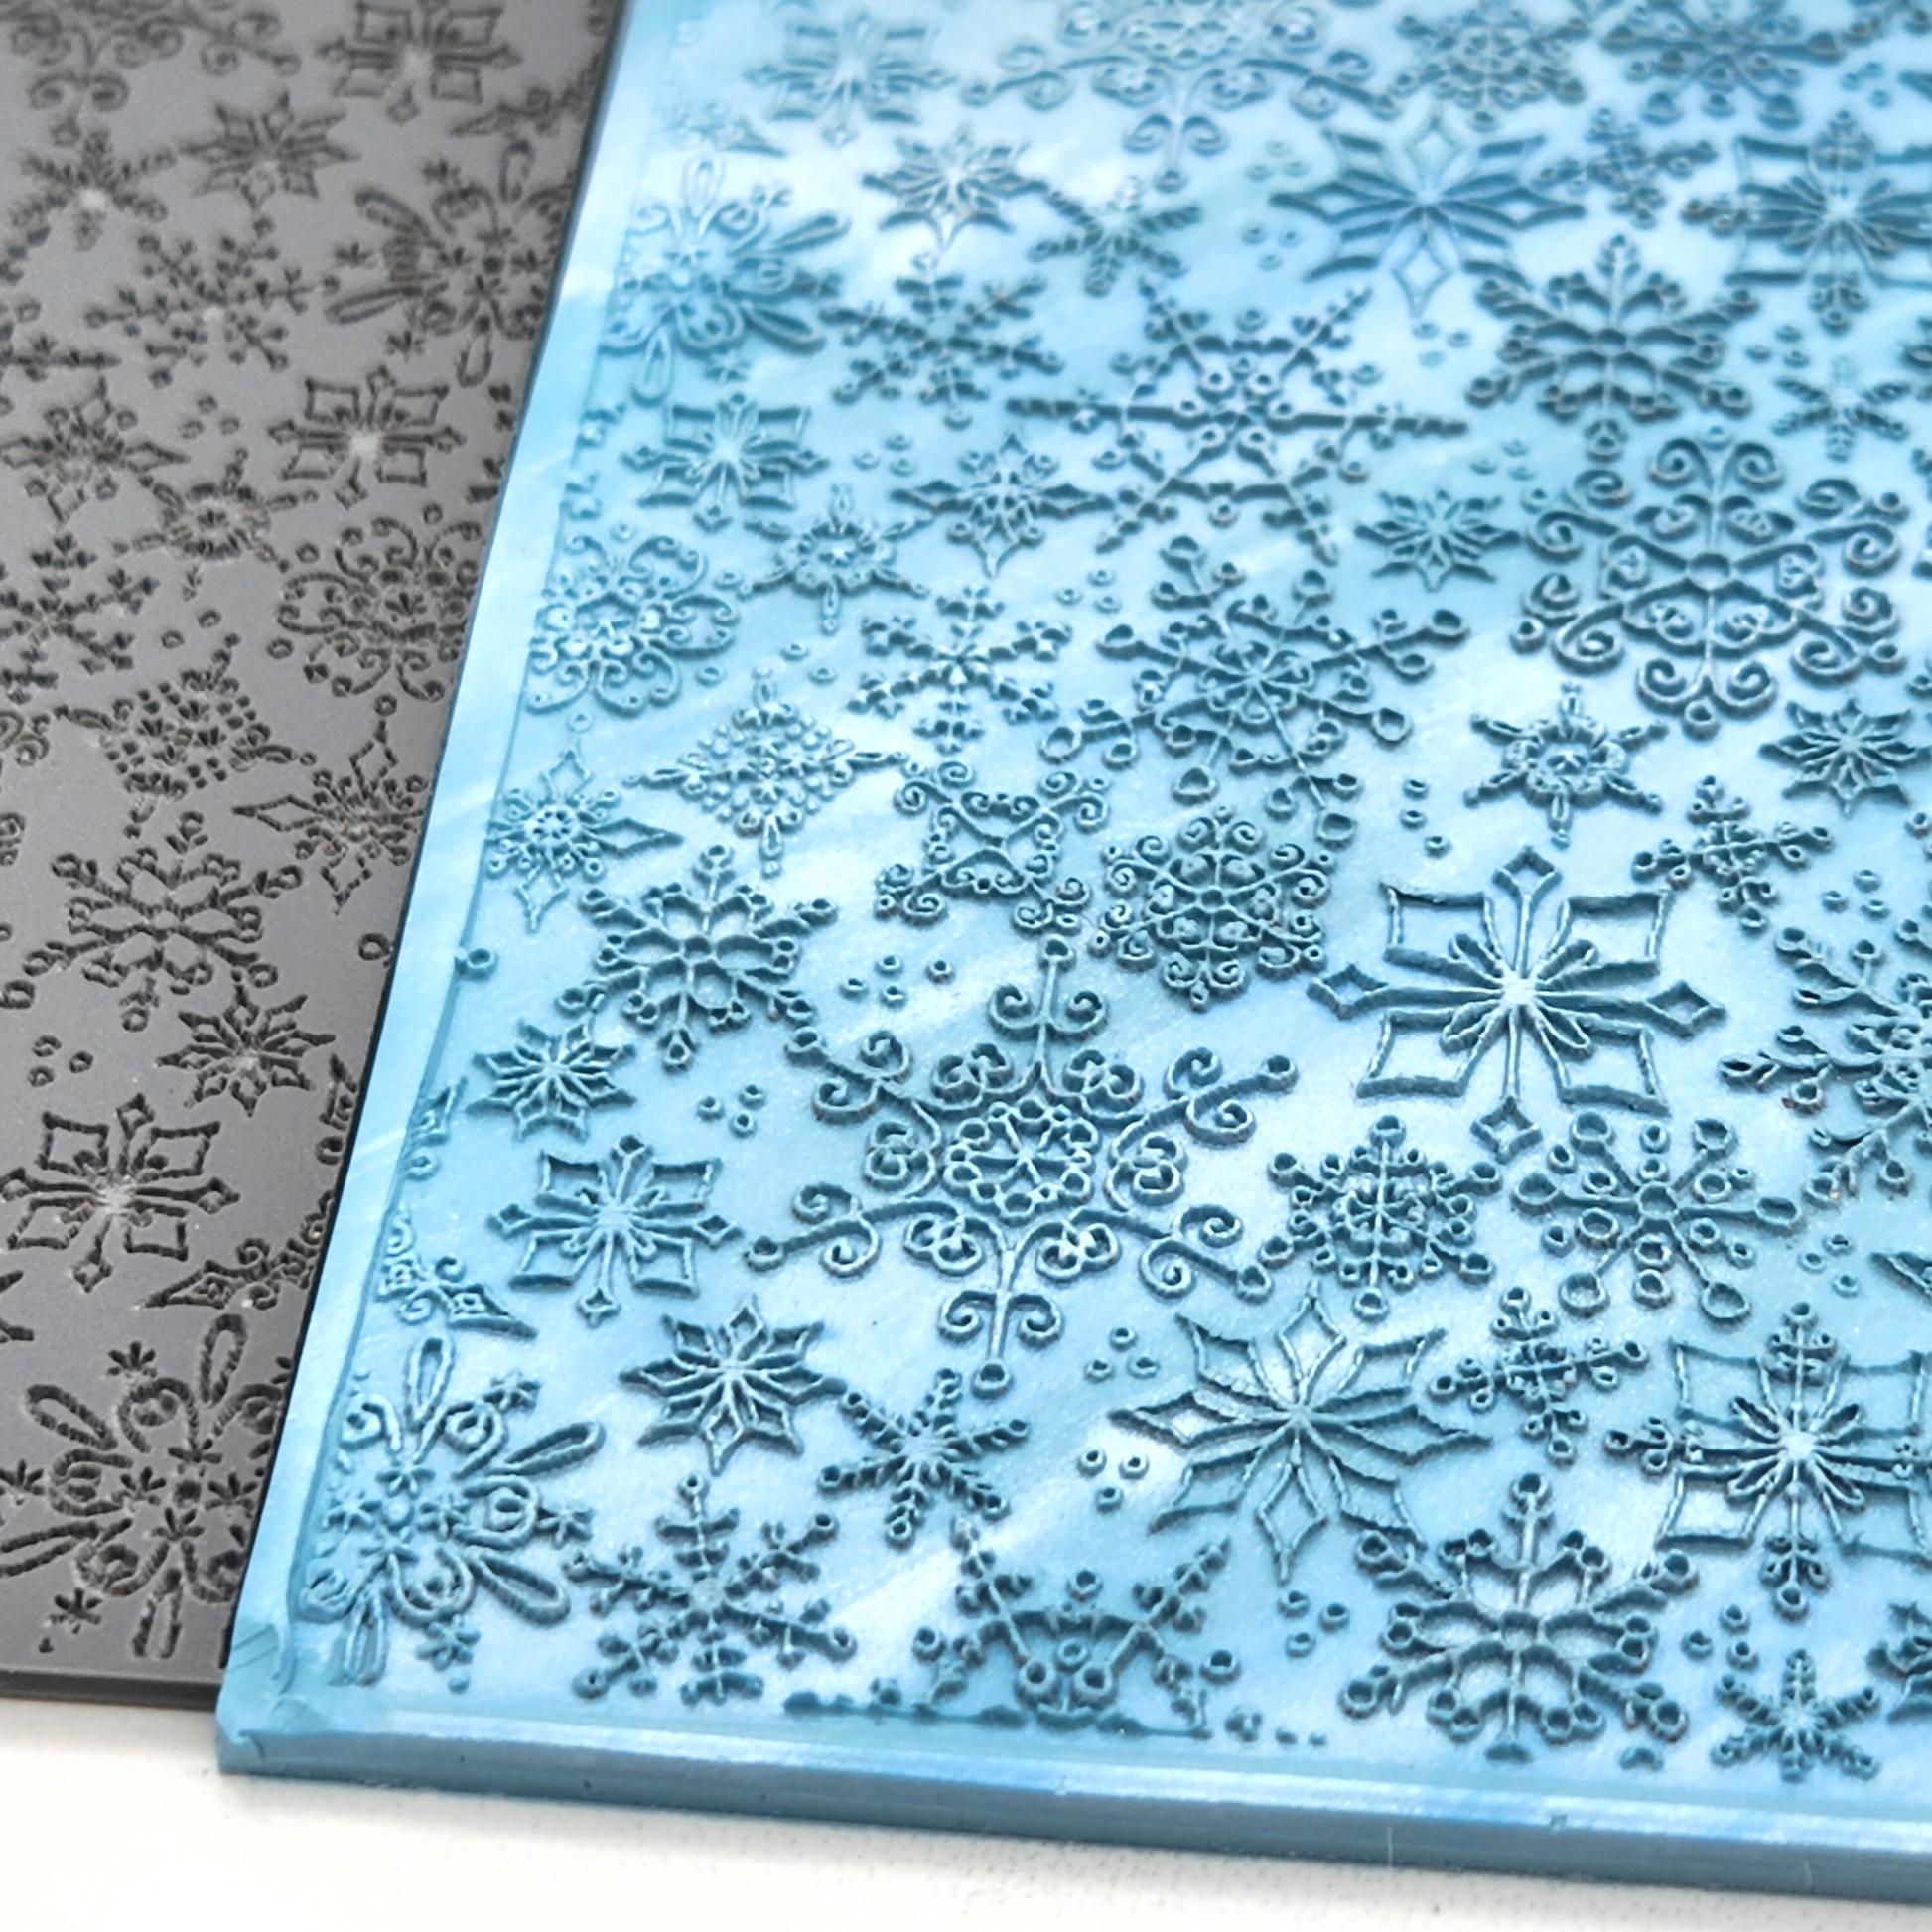 Winter Christmas Frozen Snowflake Texture Details for Polymer Clay Crafts